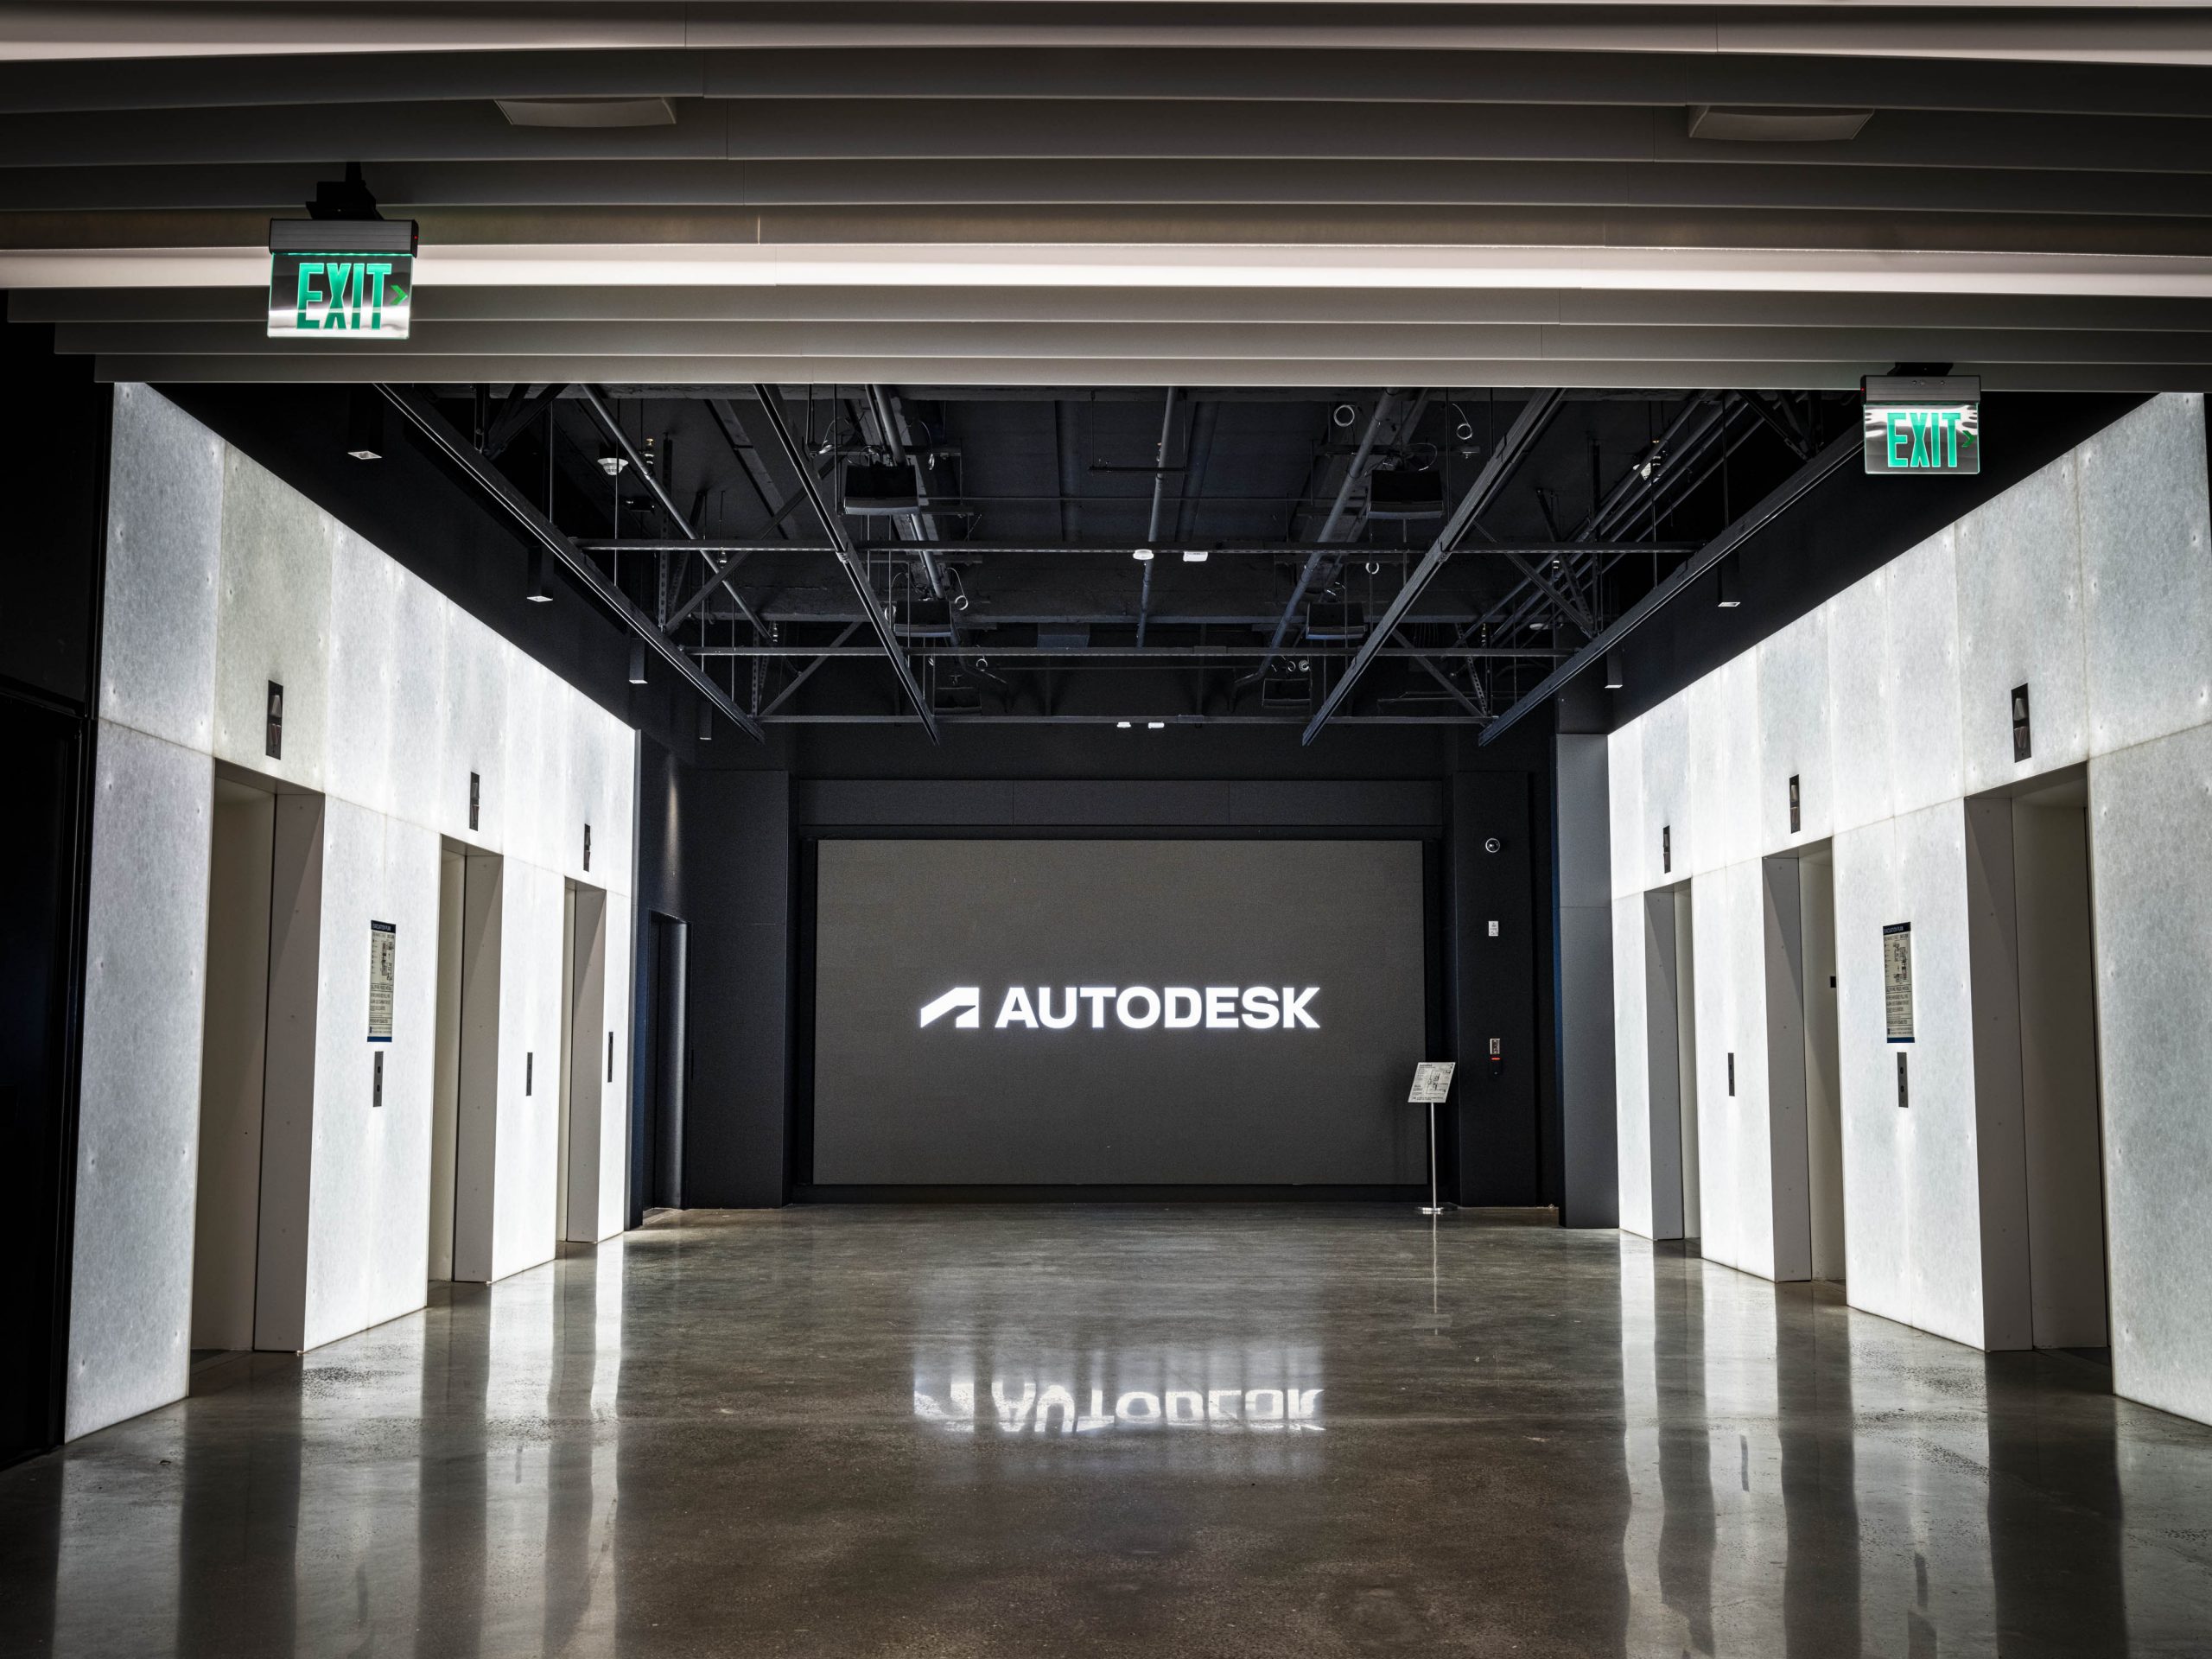 Lobby of the reimagined Autodesk Gallery in San Francisco, CA.